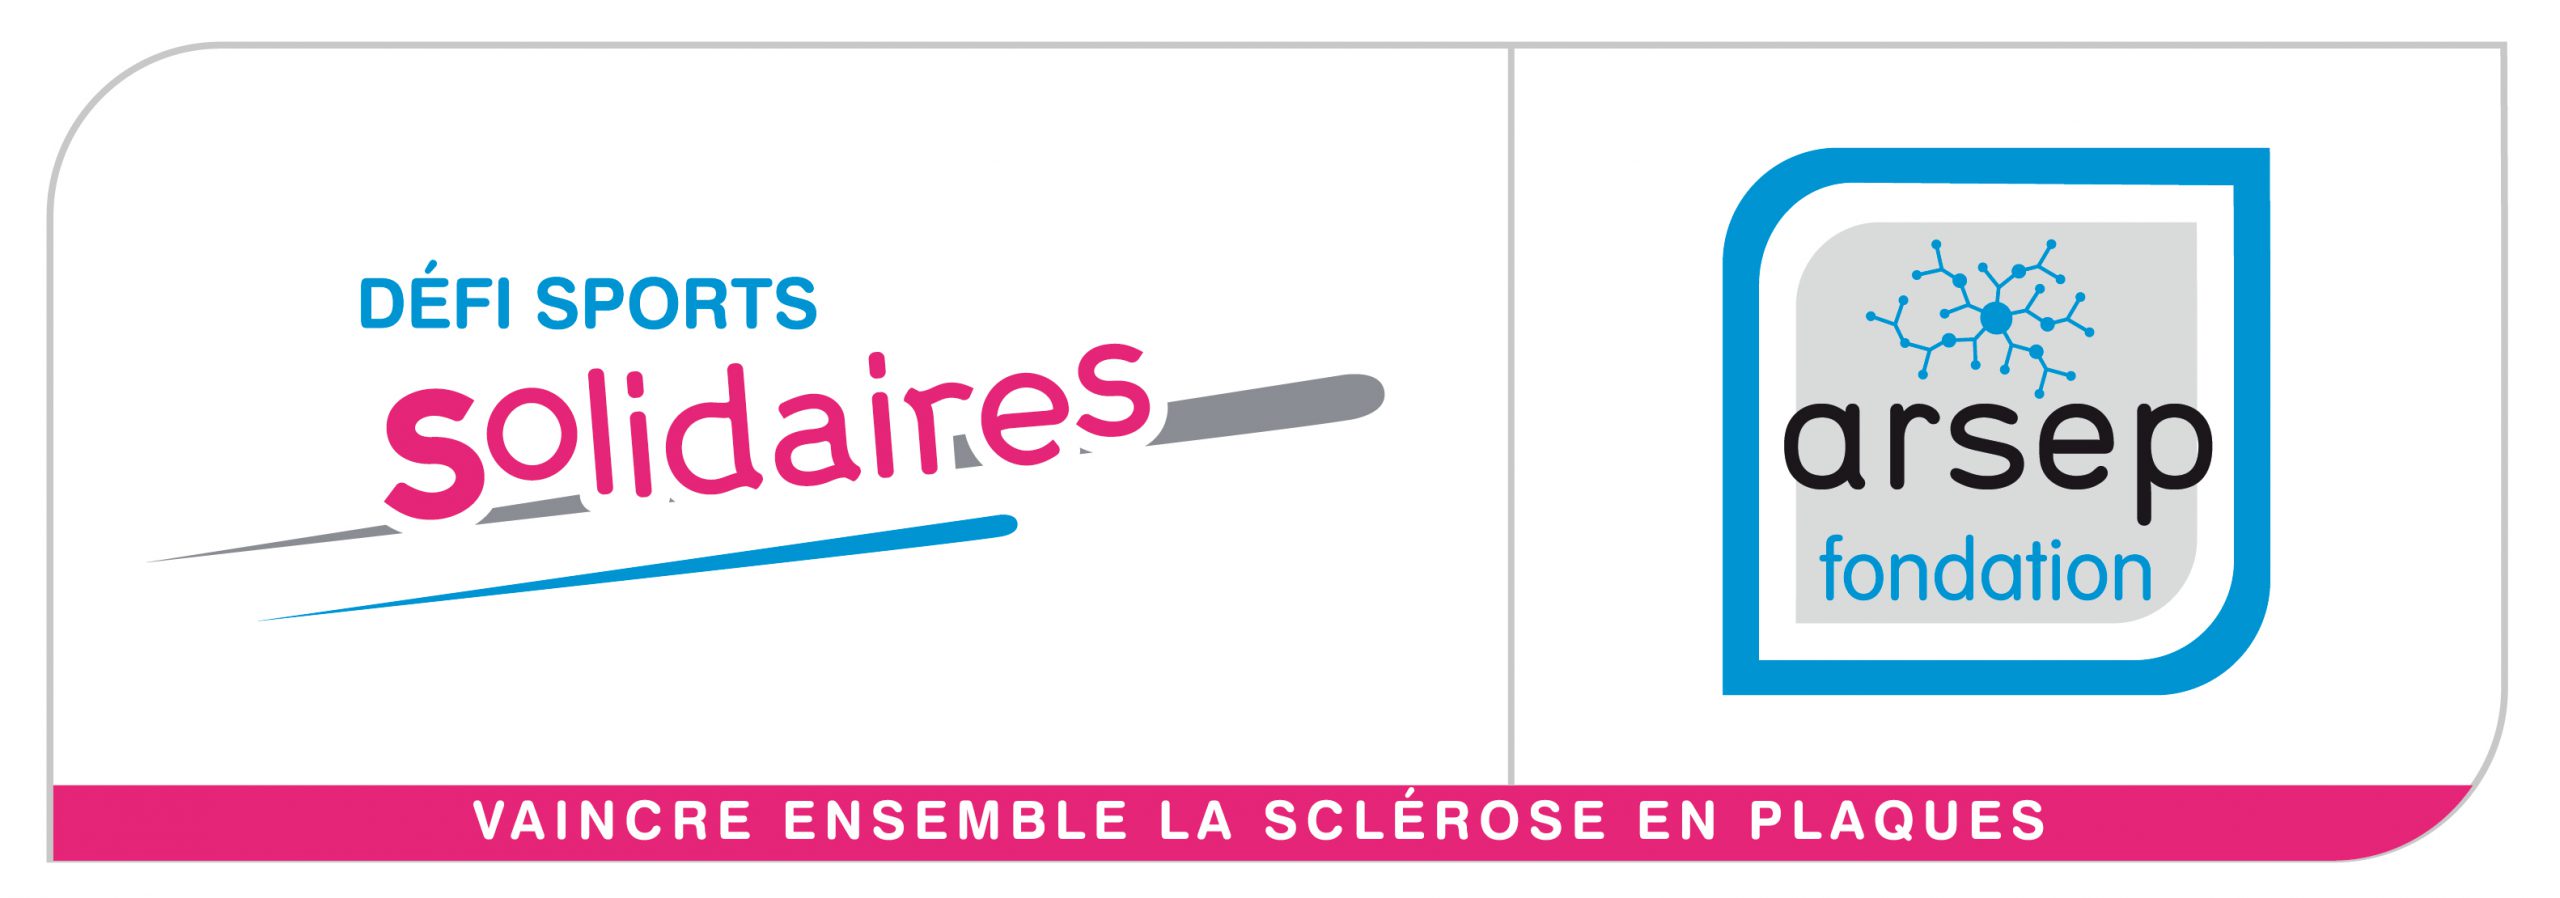 logo solidaires:arsep